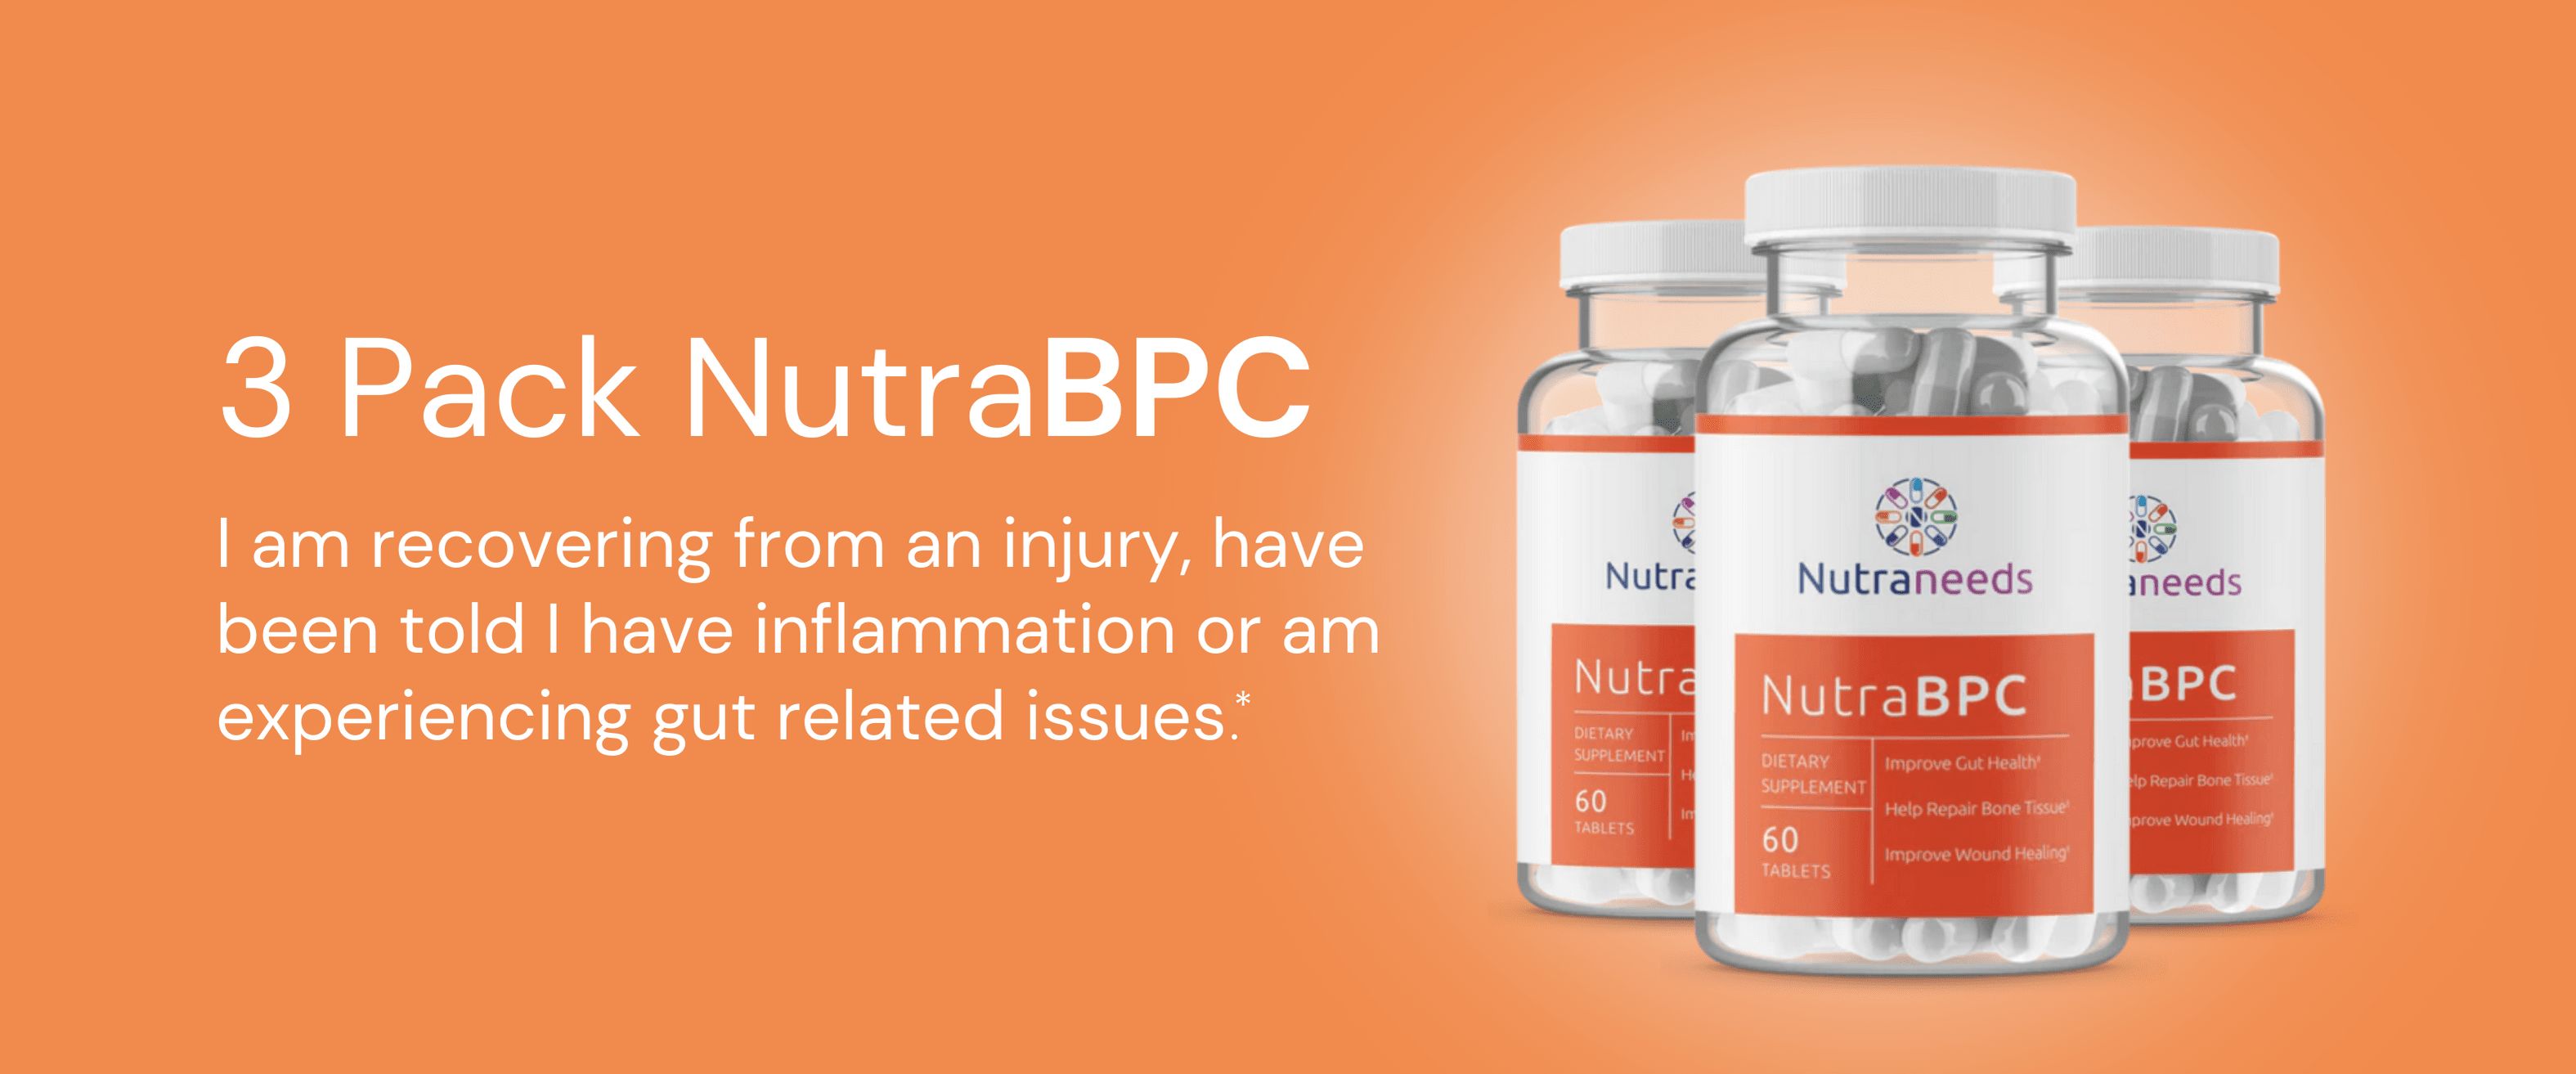 3 Pack of NutraBPC to reduce inflammation